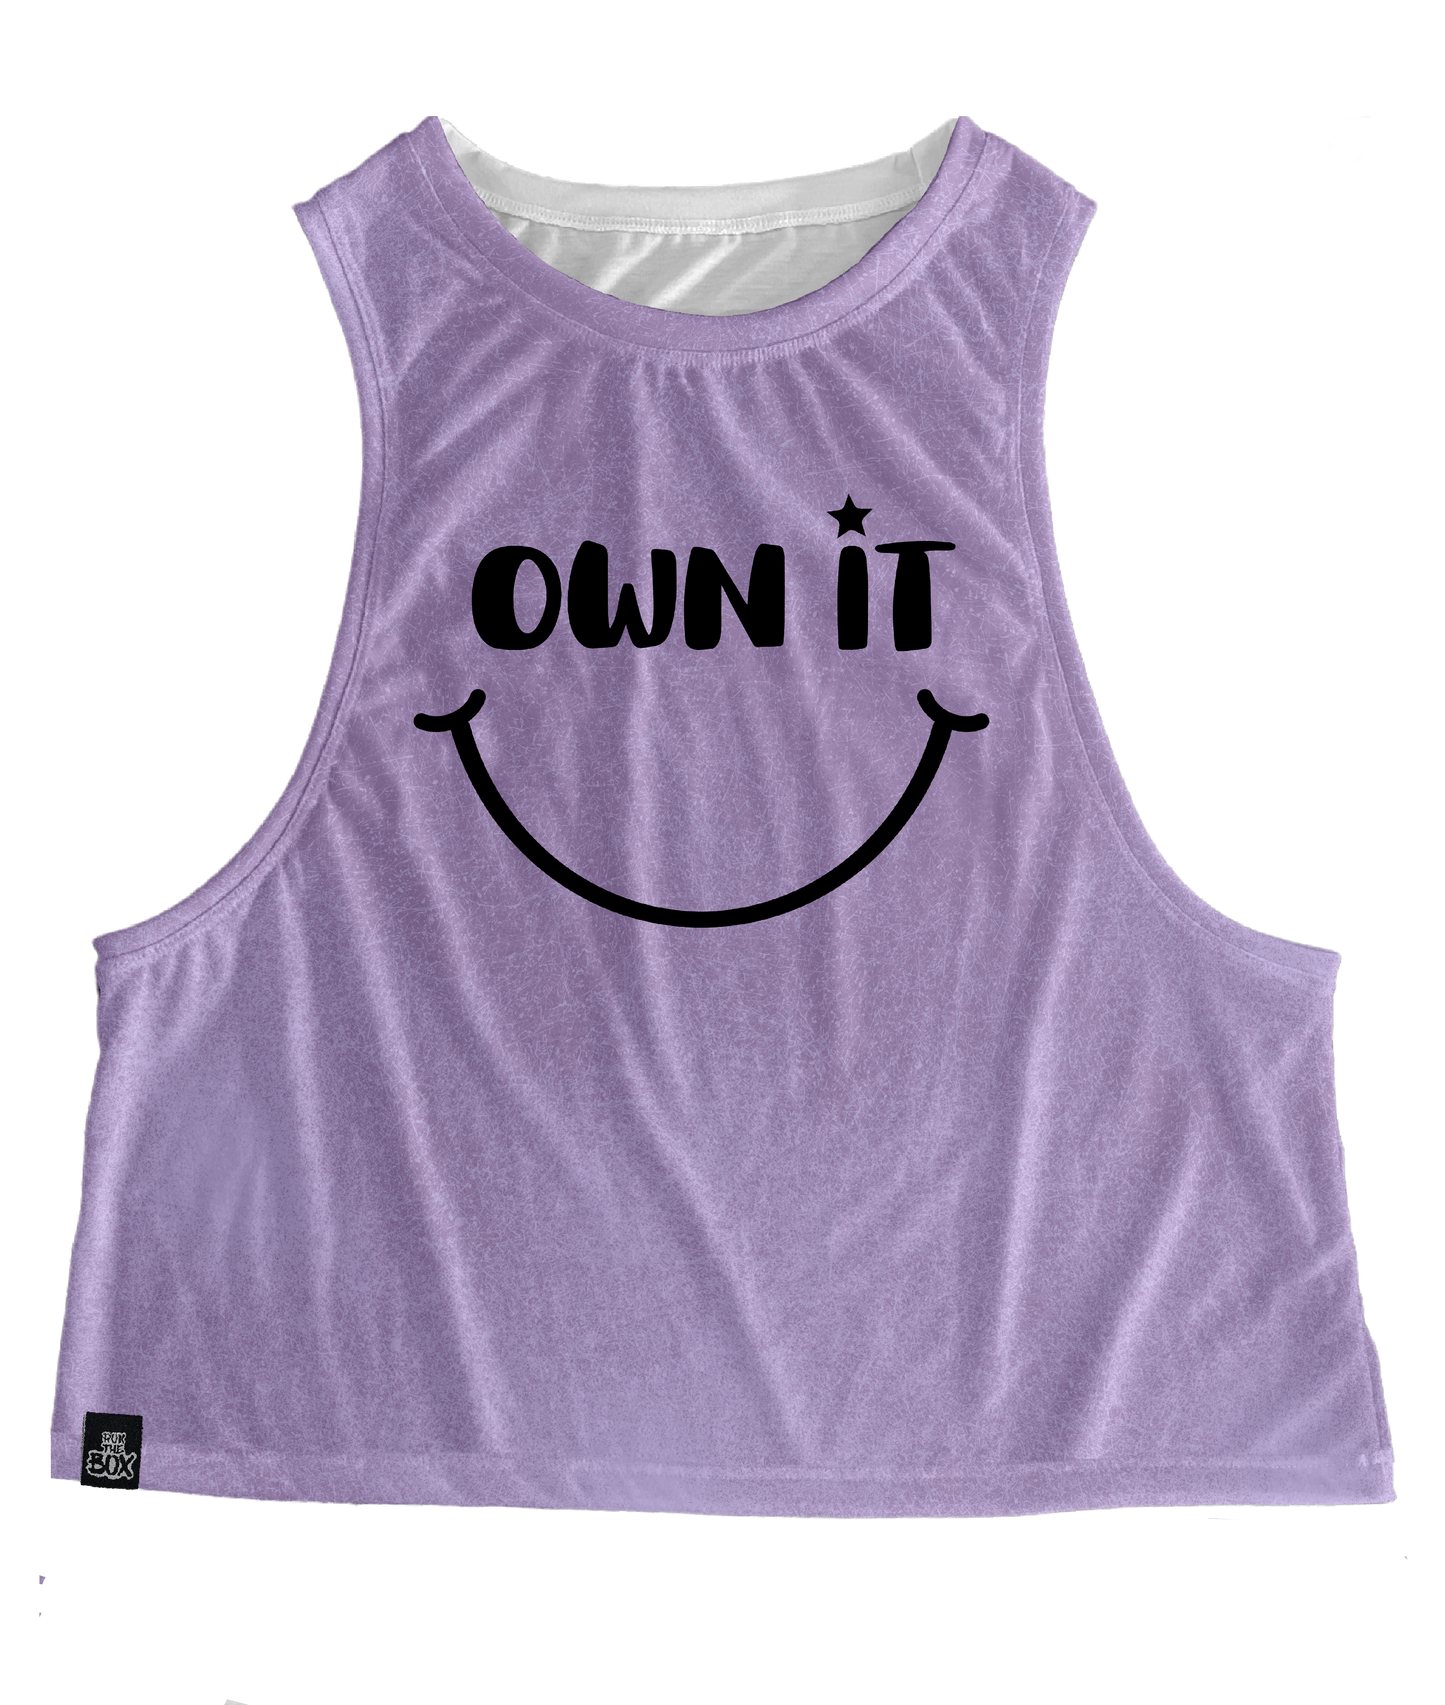 OWN IT (lavender) Tops